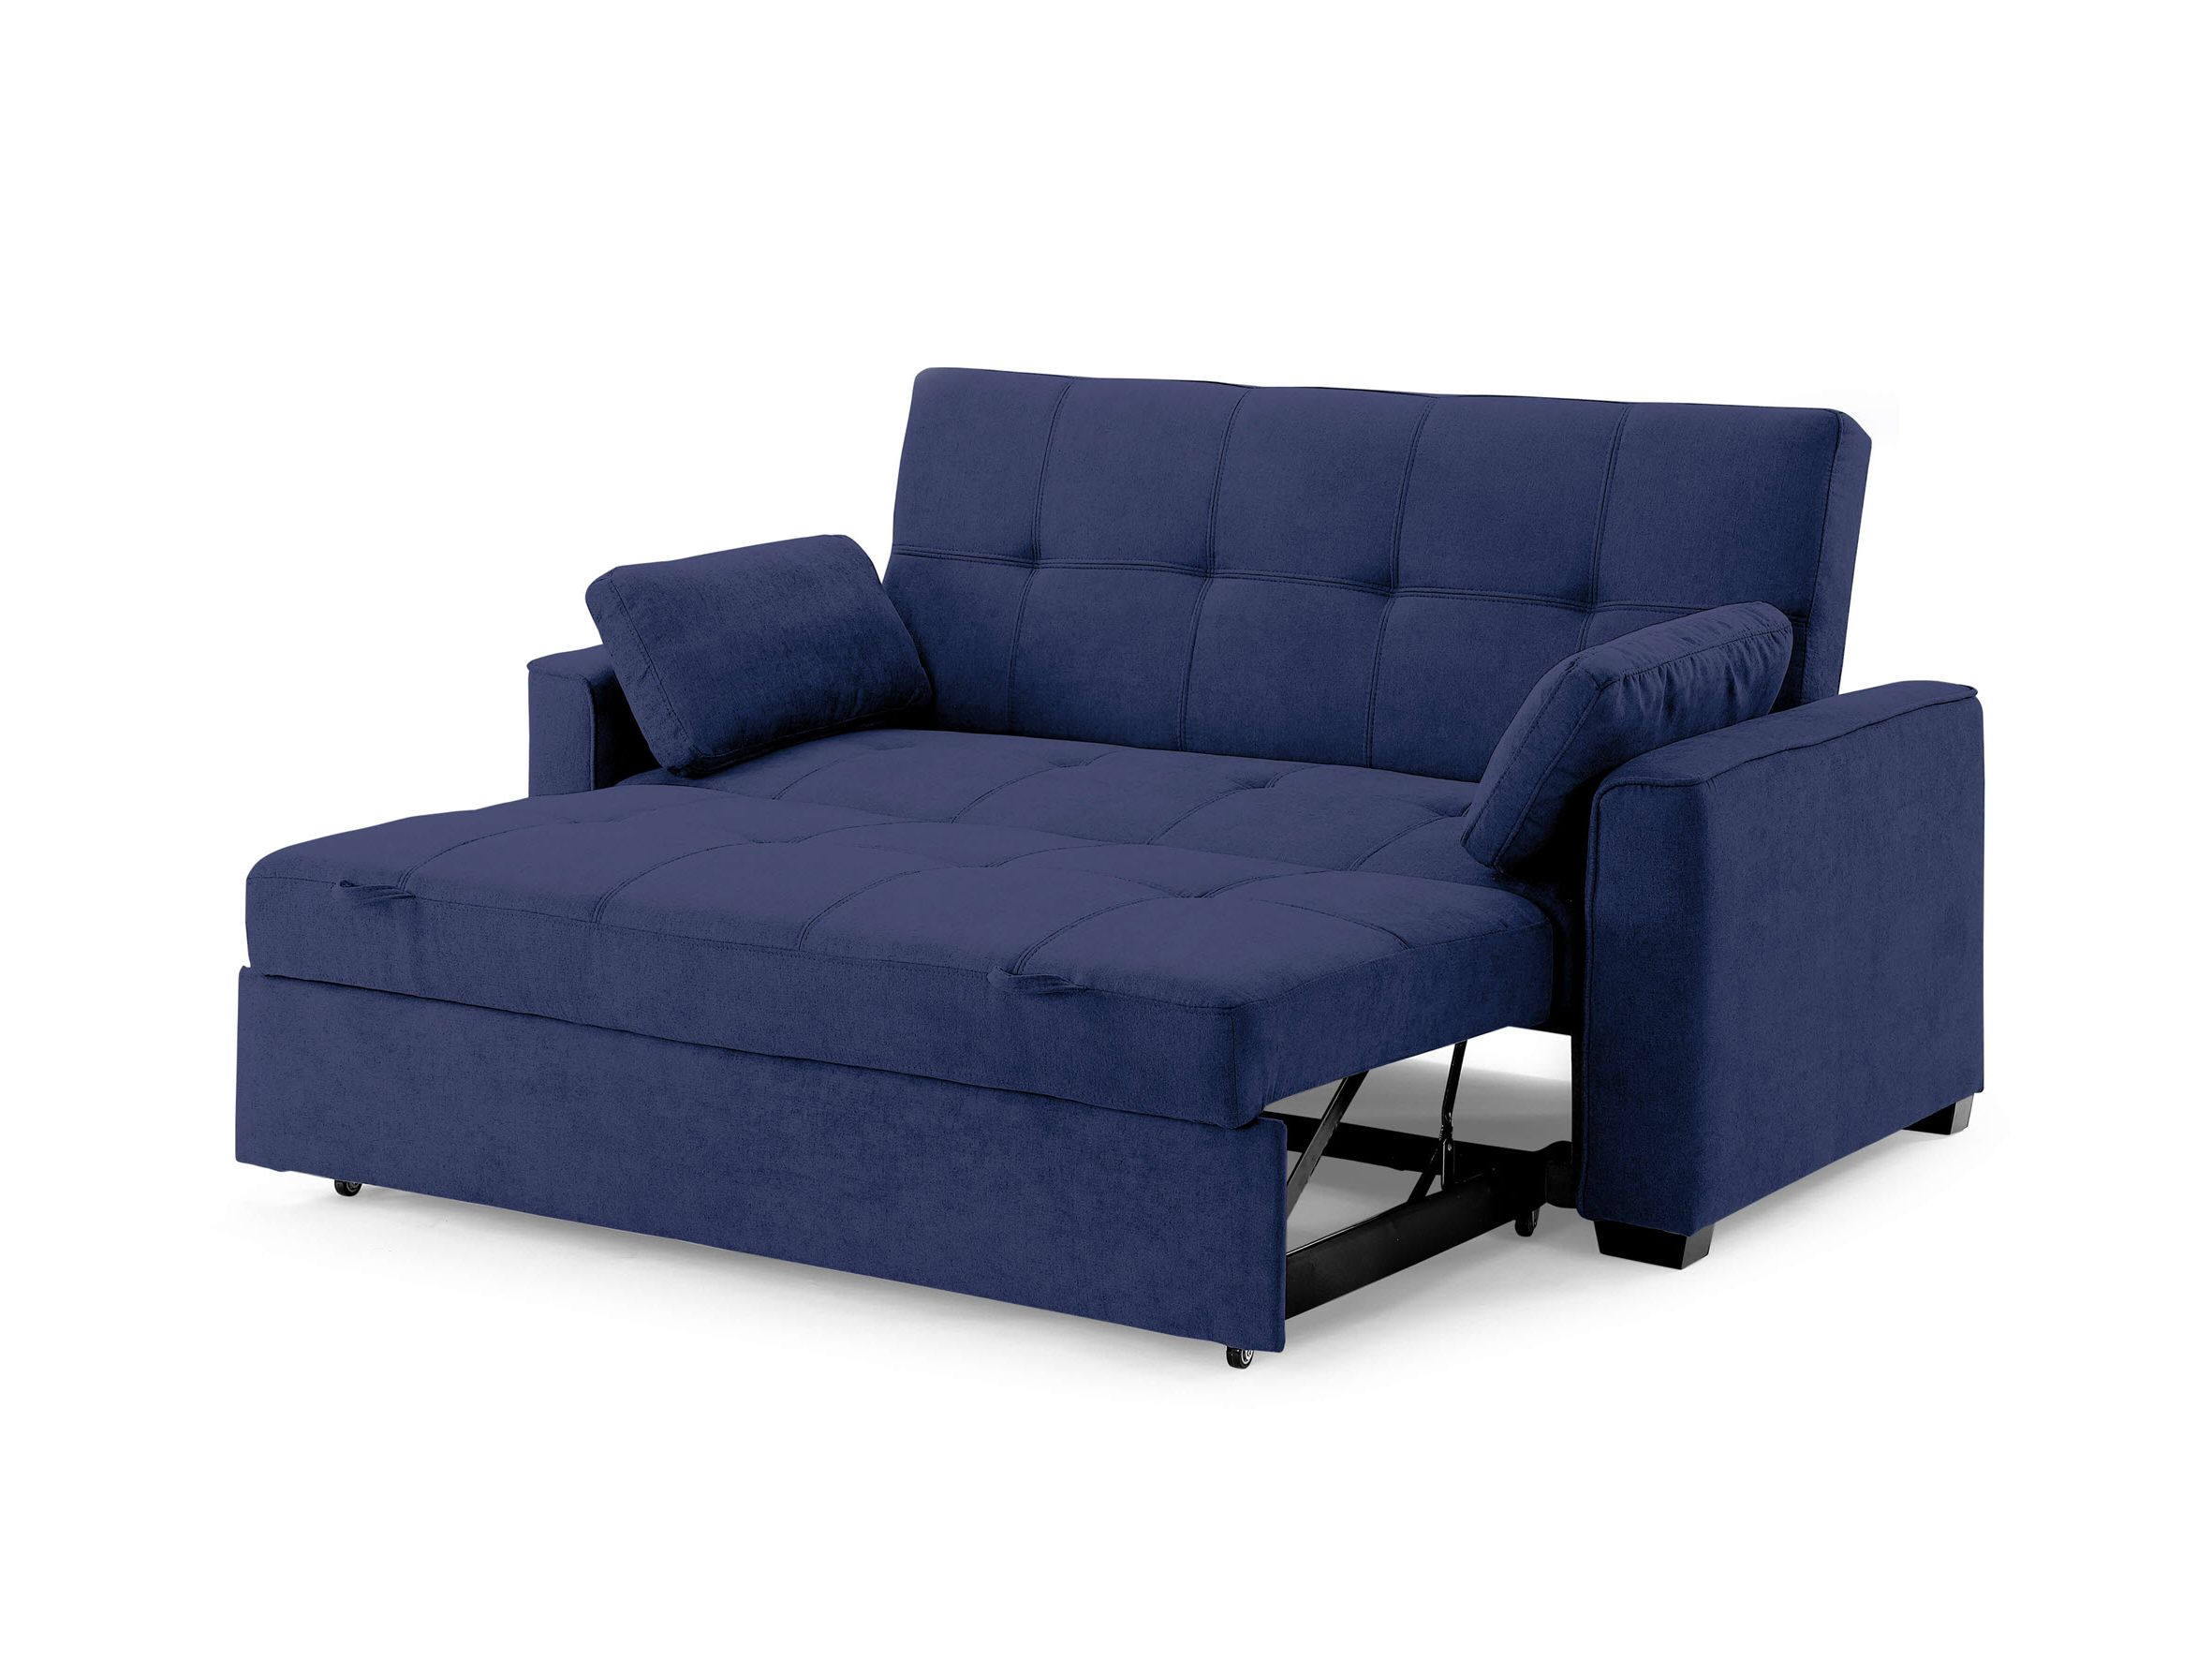 Cape Cod Nantucket Futon Sofa Sleeper Bed Navy Blue | Sleepworks Intended For Navy Sleeper Sofa Couches (View 3 of 20)